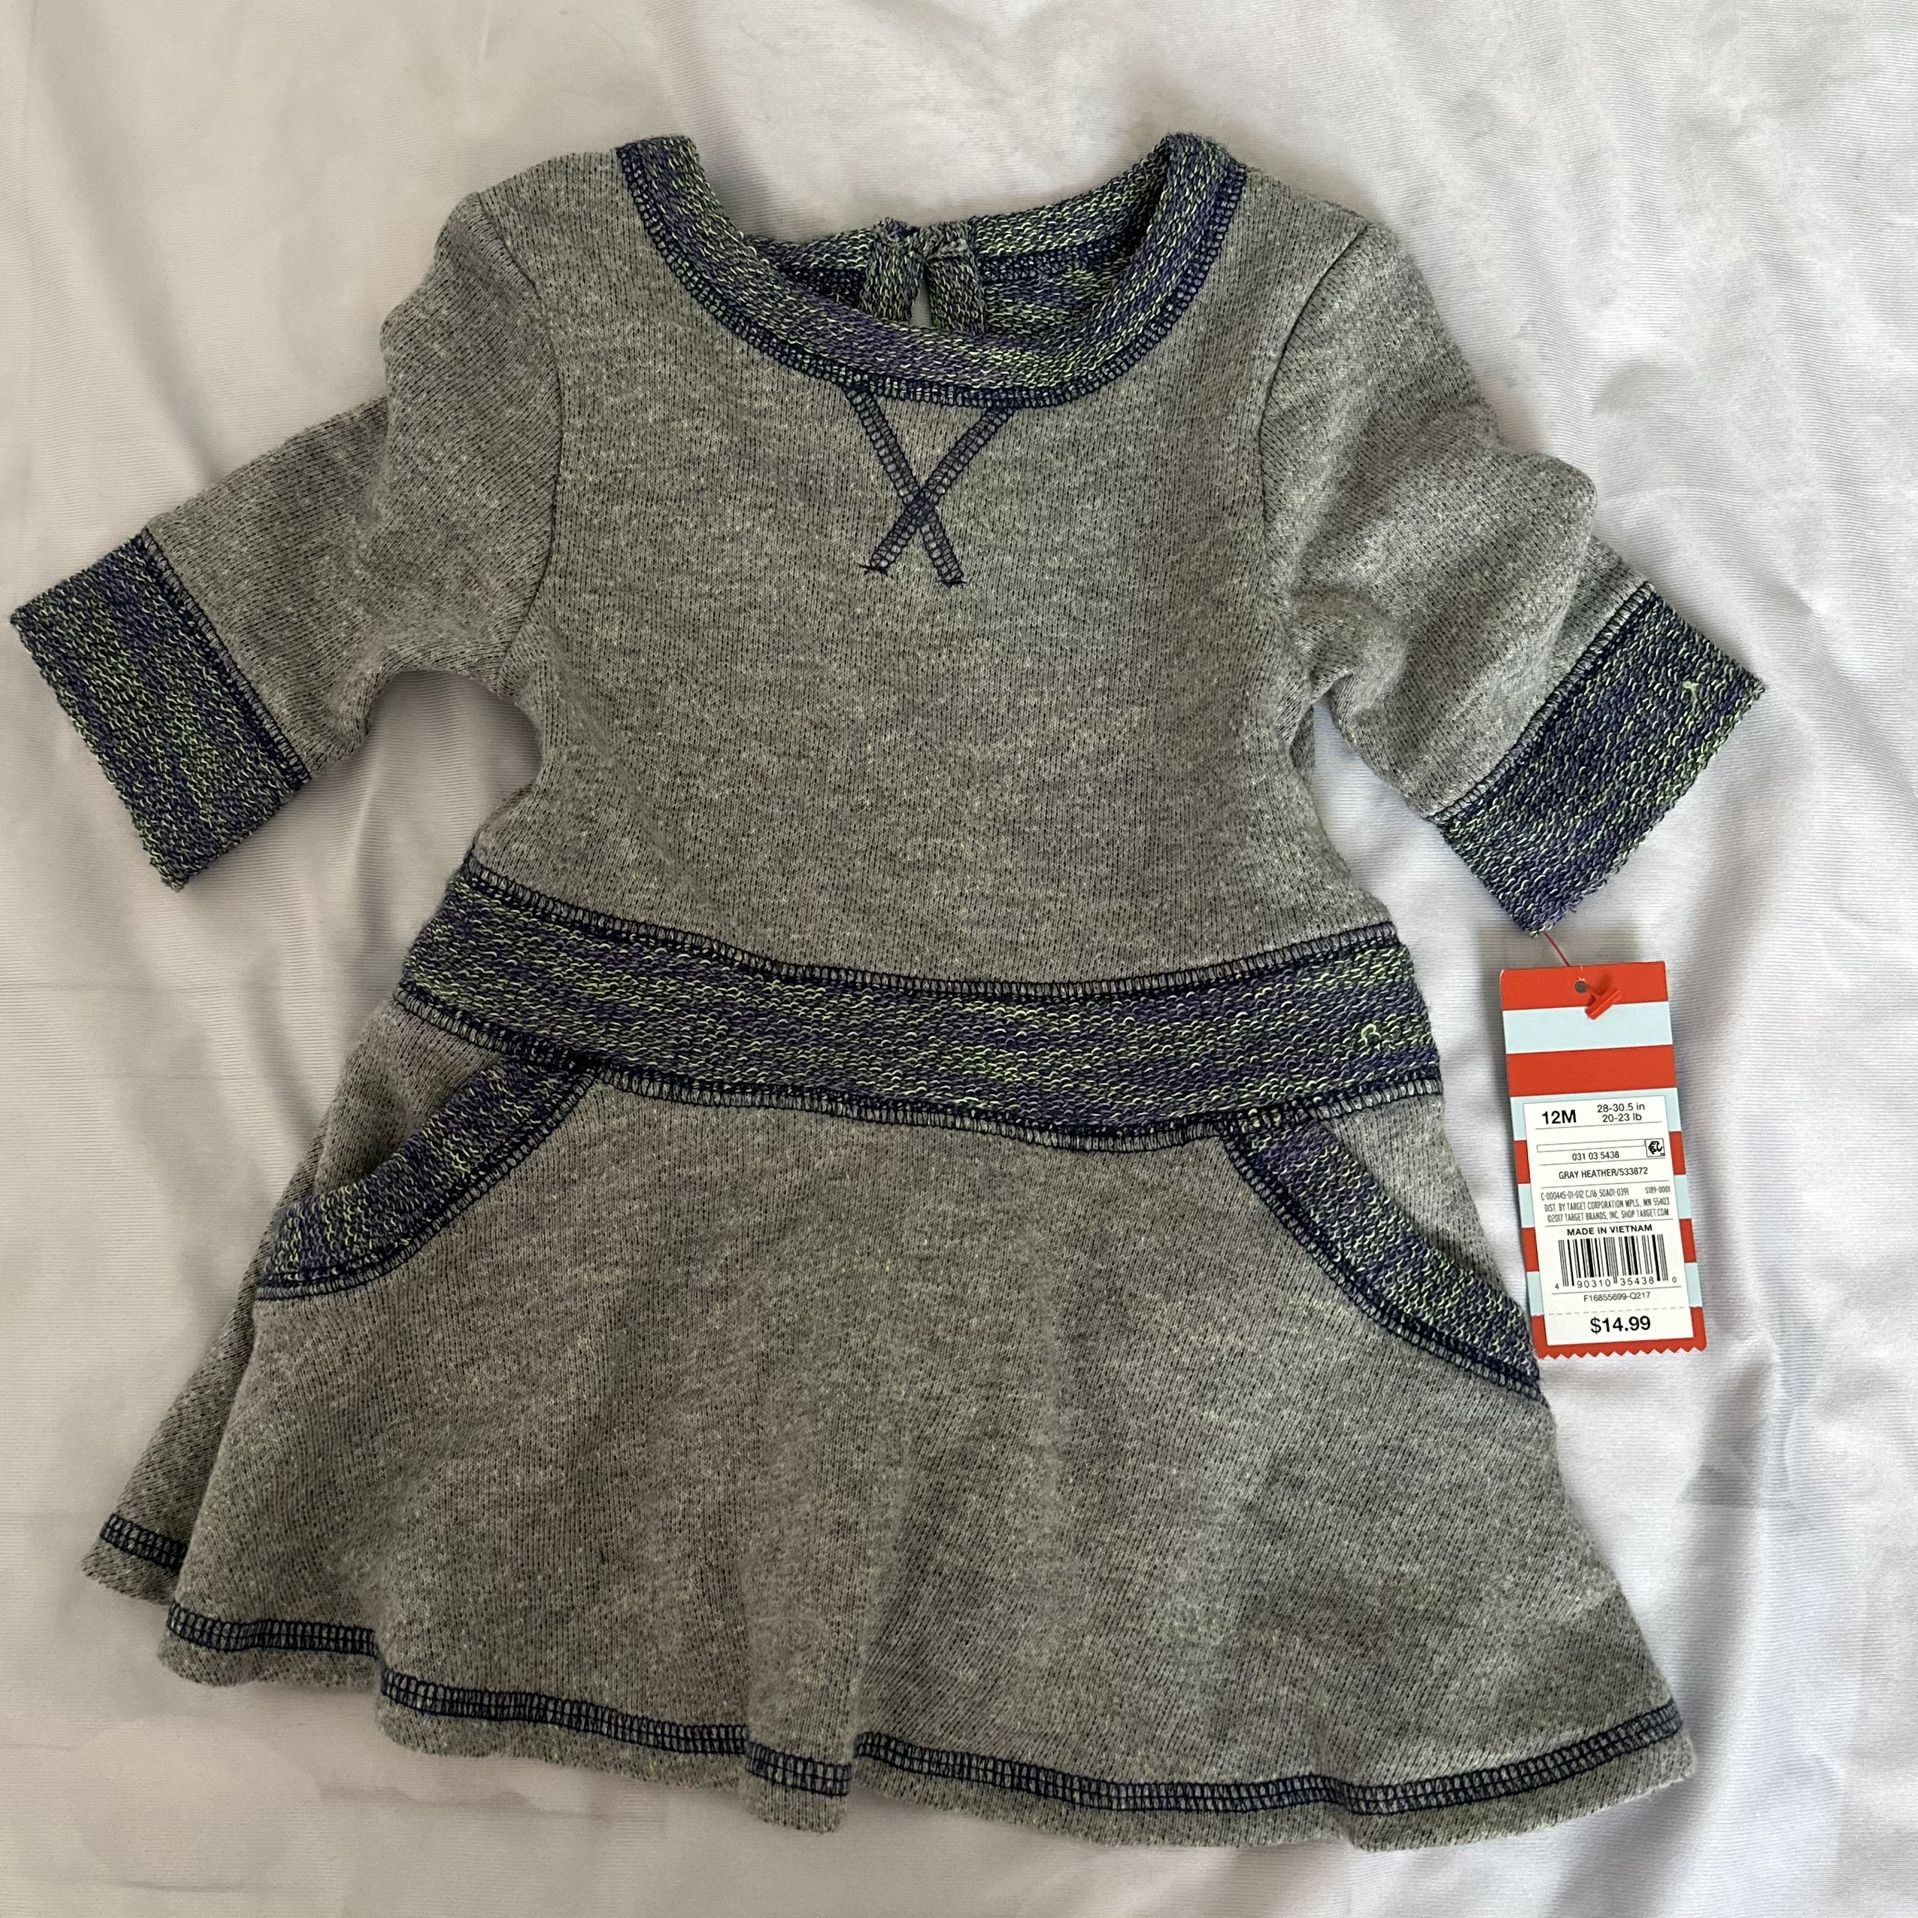 GRAY 12 MONTH 9-12 MONTH DRESS NEW WITH TAGS NWT